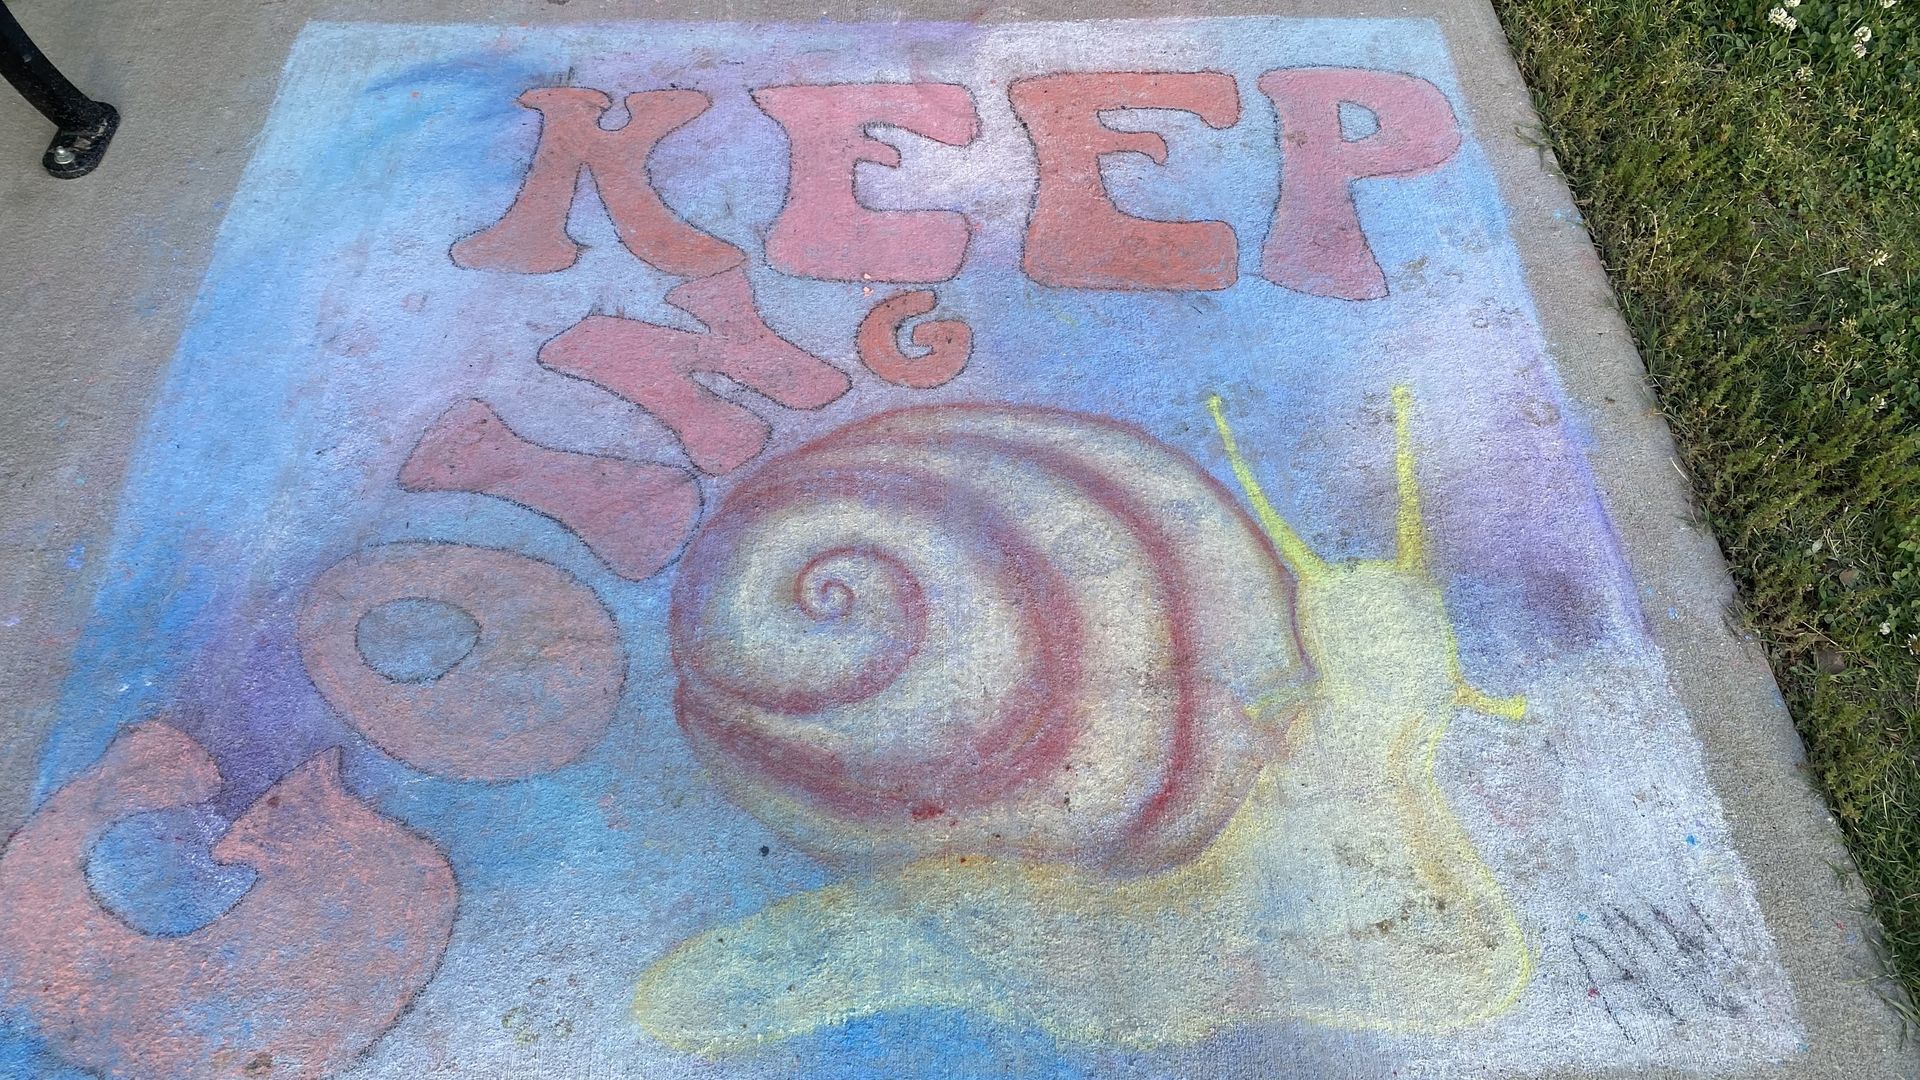 A sidewalk chalk drawing of a snail reading "Keep Going."